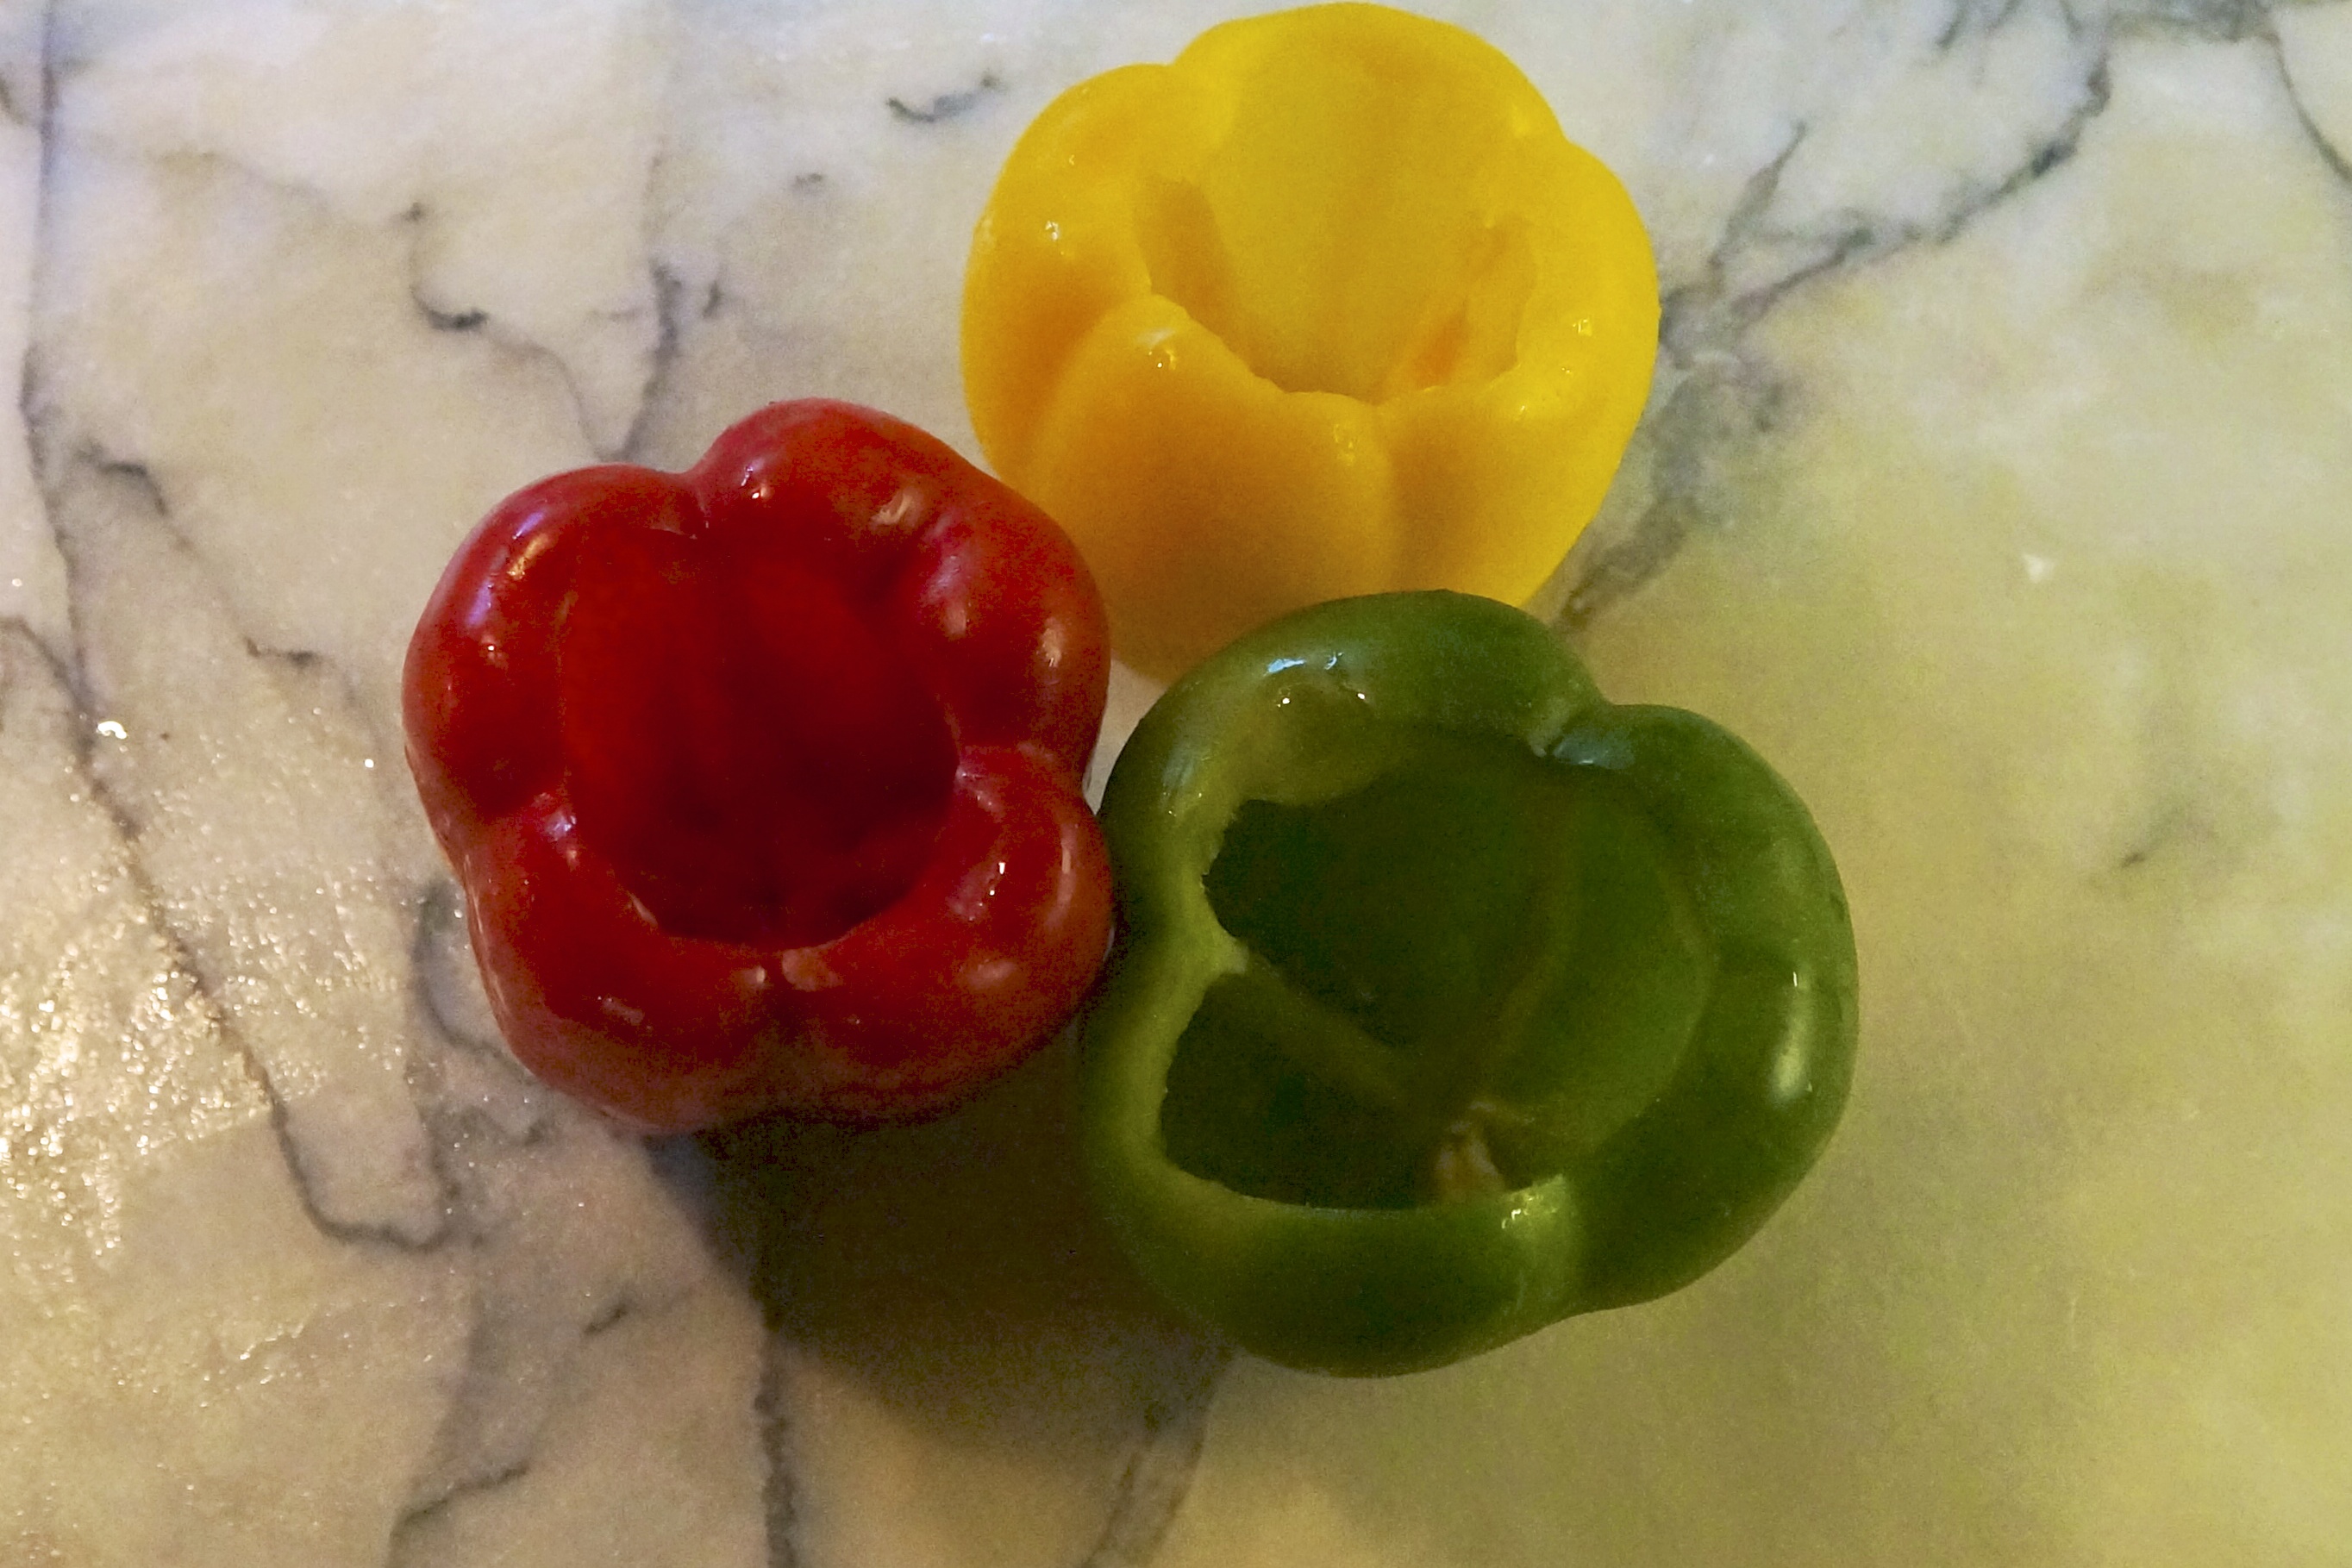 stuffed pepper ingredients, hollow peppers